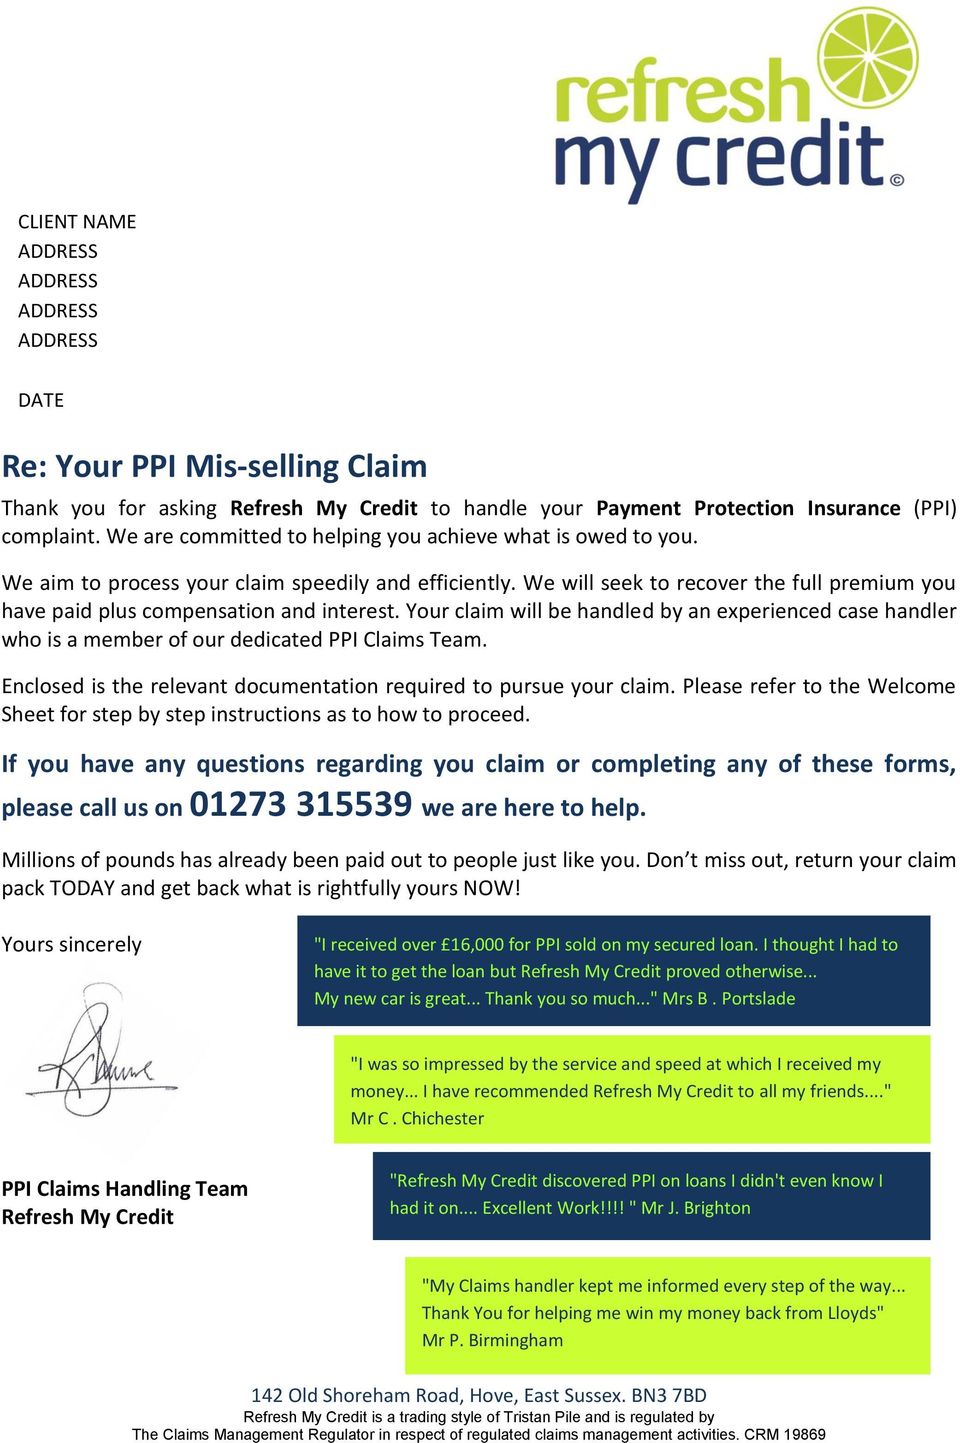 We will seek to recover the full premium you have paid plus compensation and interest. Your claim will be handled by an experienced case handler who is a member of our dedicated PPI Claims Team.